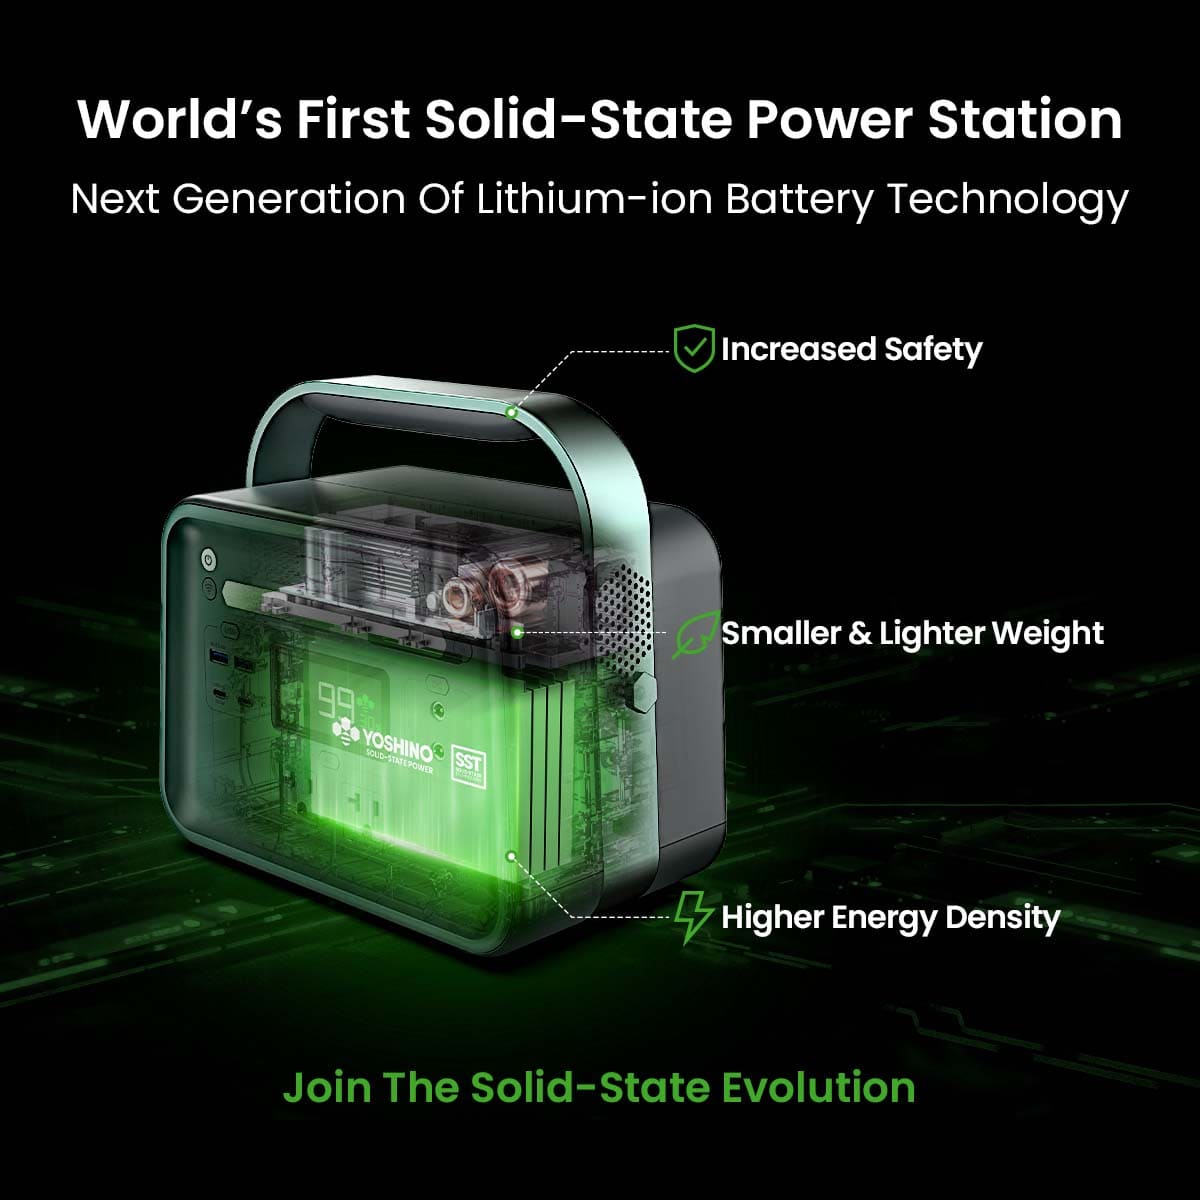 YOSHINO Solid-State Portable Power Station, 330W /480W Peak, Push-Button  Start Battery Generator for Outdoor, Home, Camping B330 SST - The Home Depot